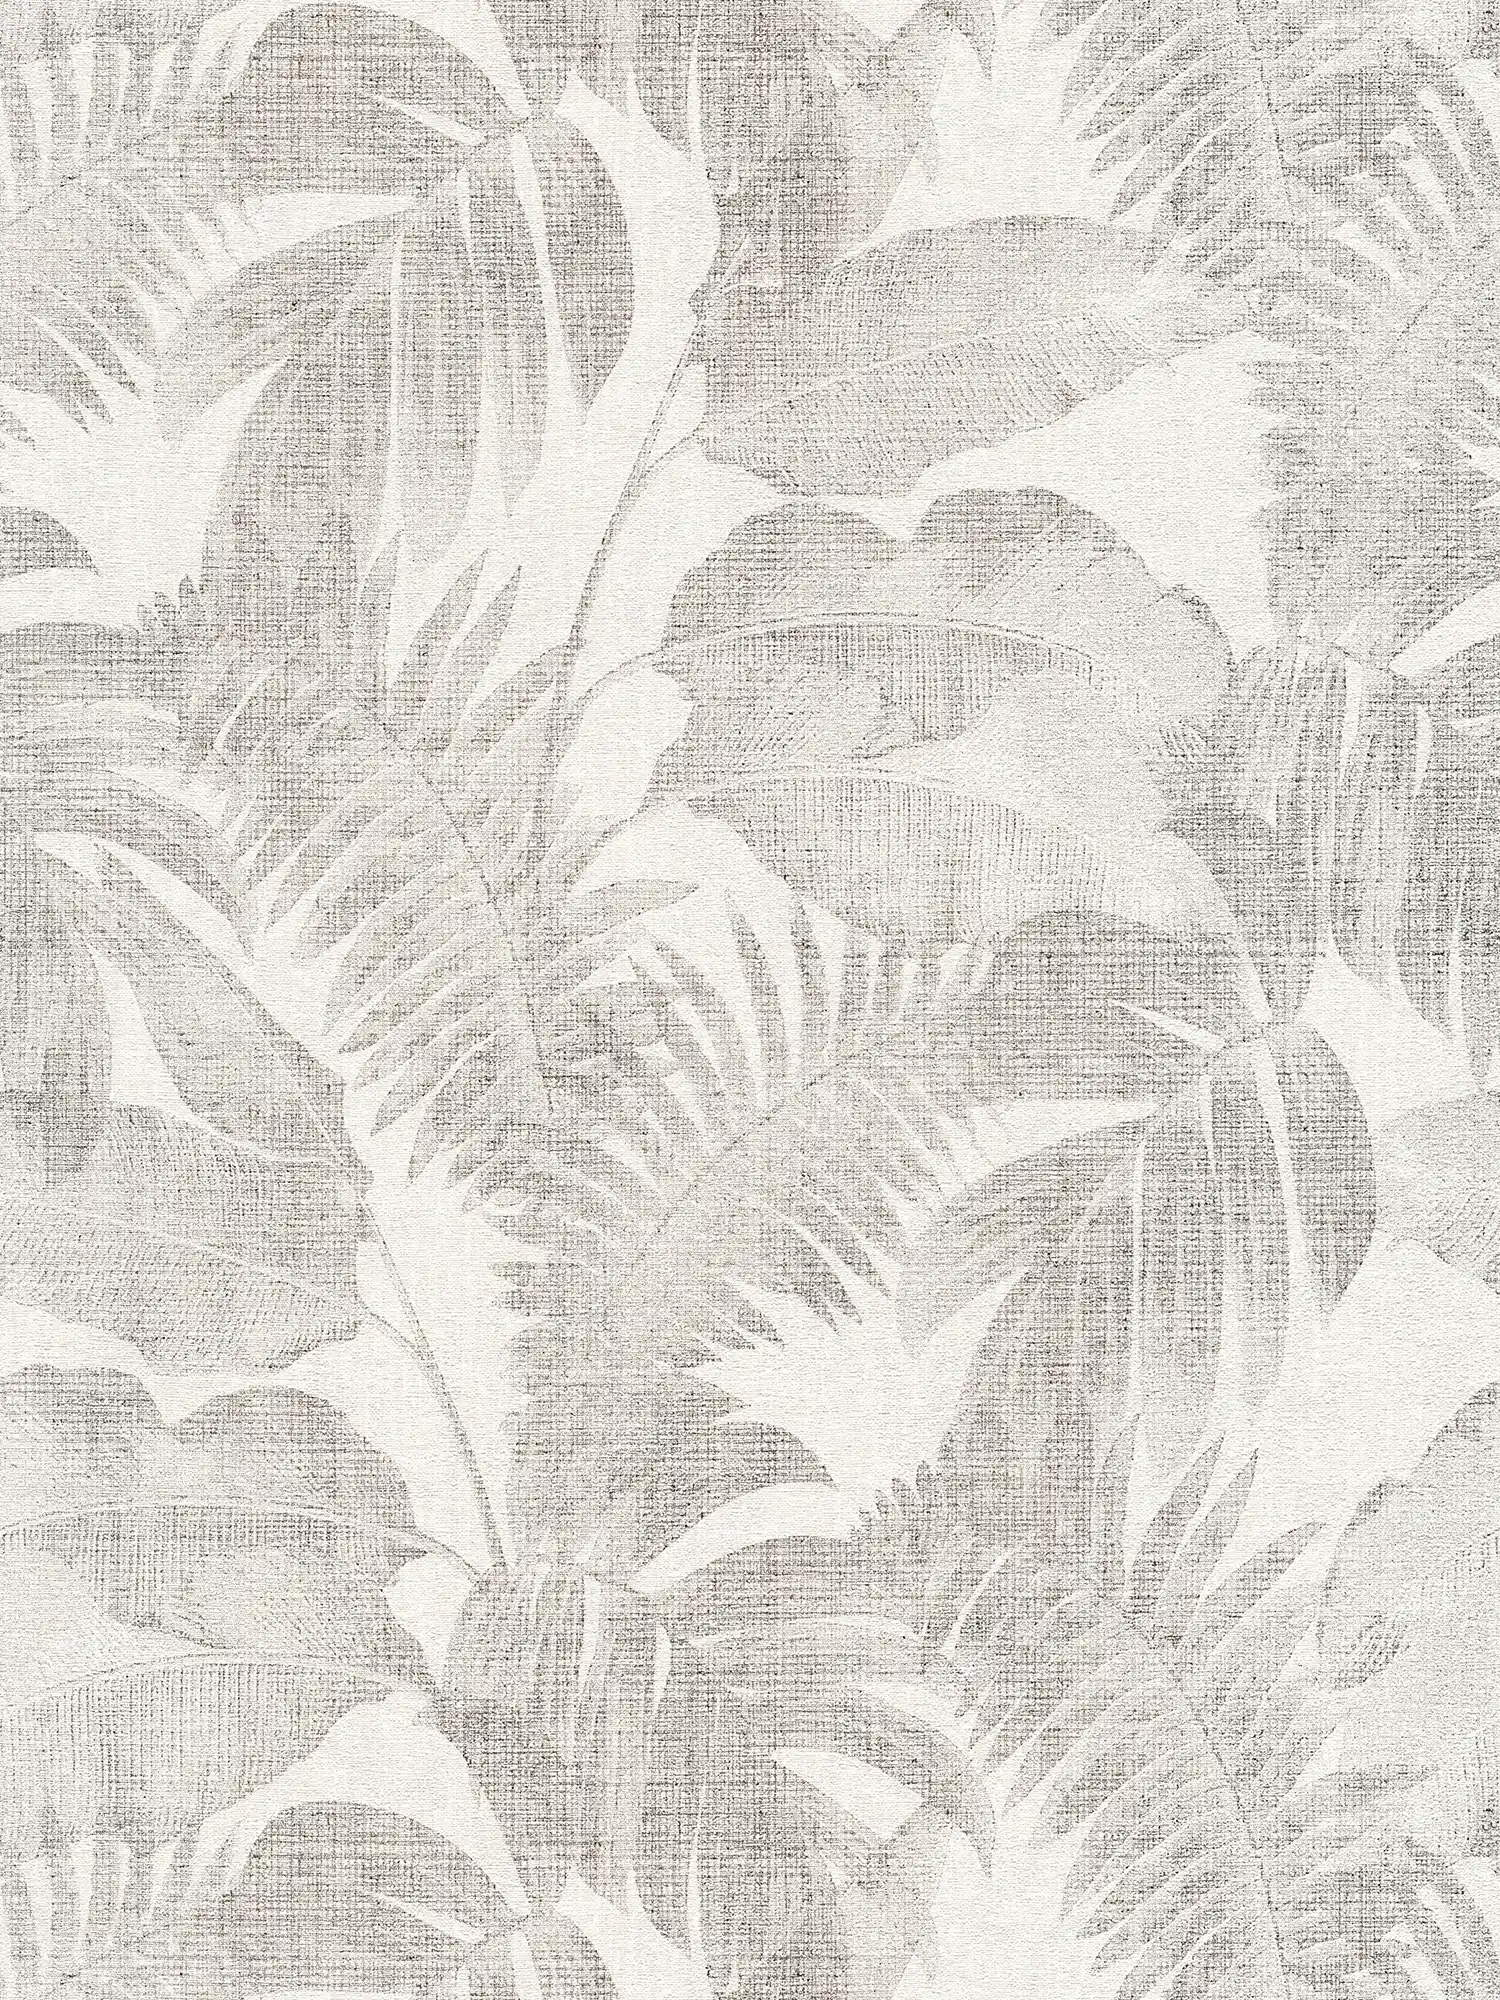 Boho jungle wallpaper with linen look - taupe, cream, beige
